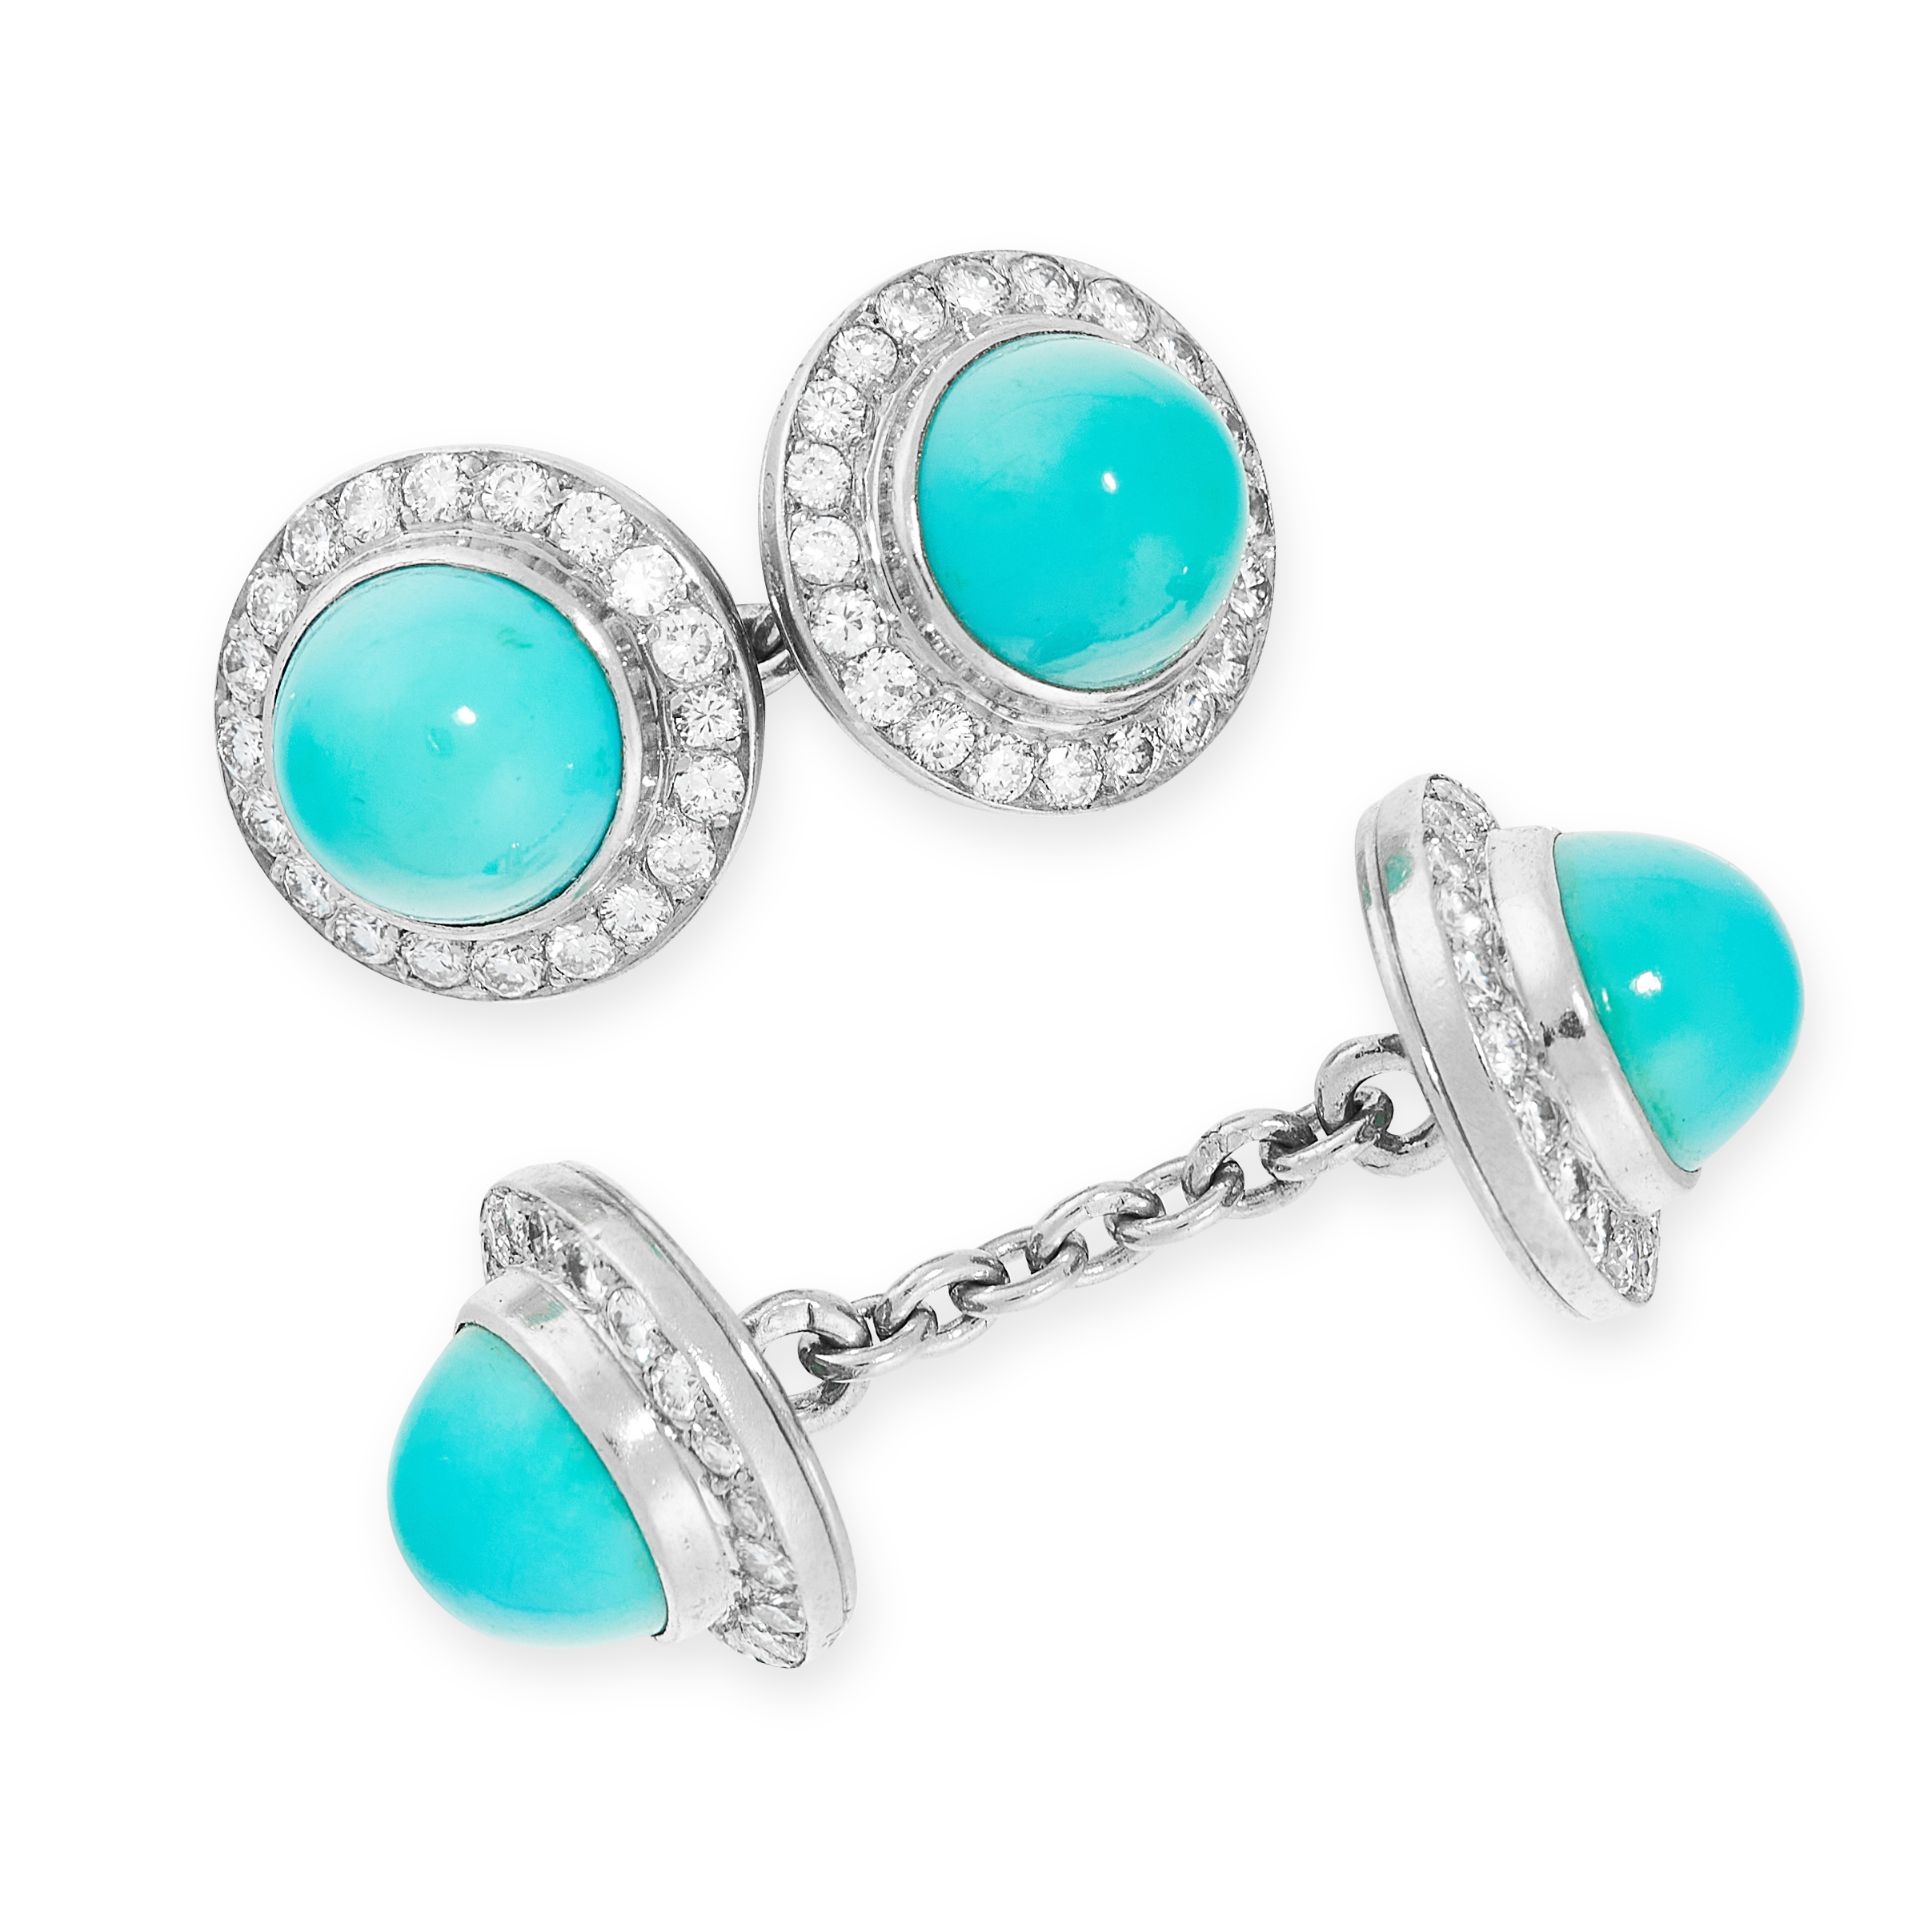 A PAIR OF TURQUOISE AND DIAMOND CUFFLINKS, CARTIER PARIS in platinum, of target design, each link